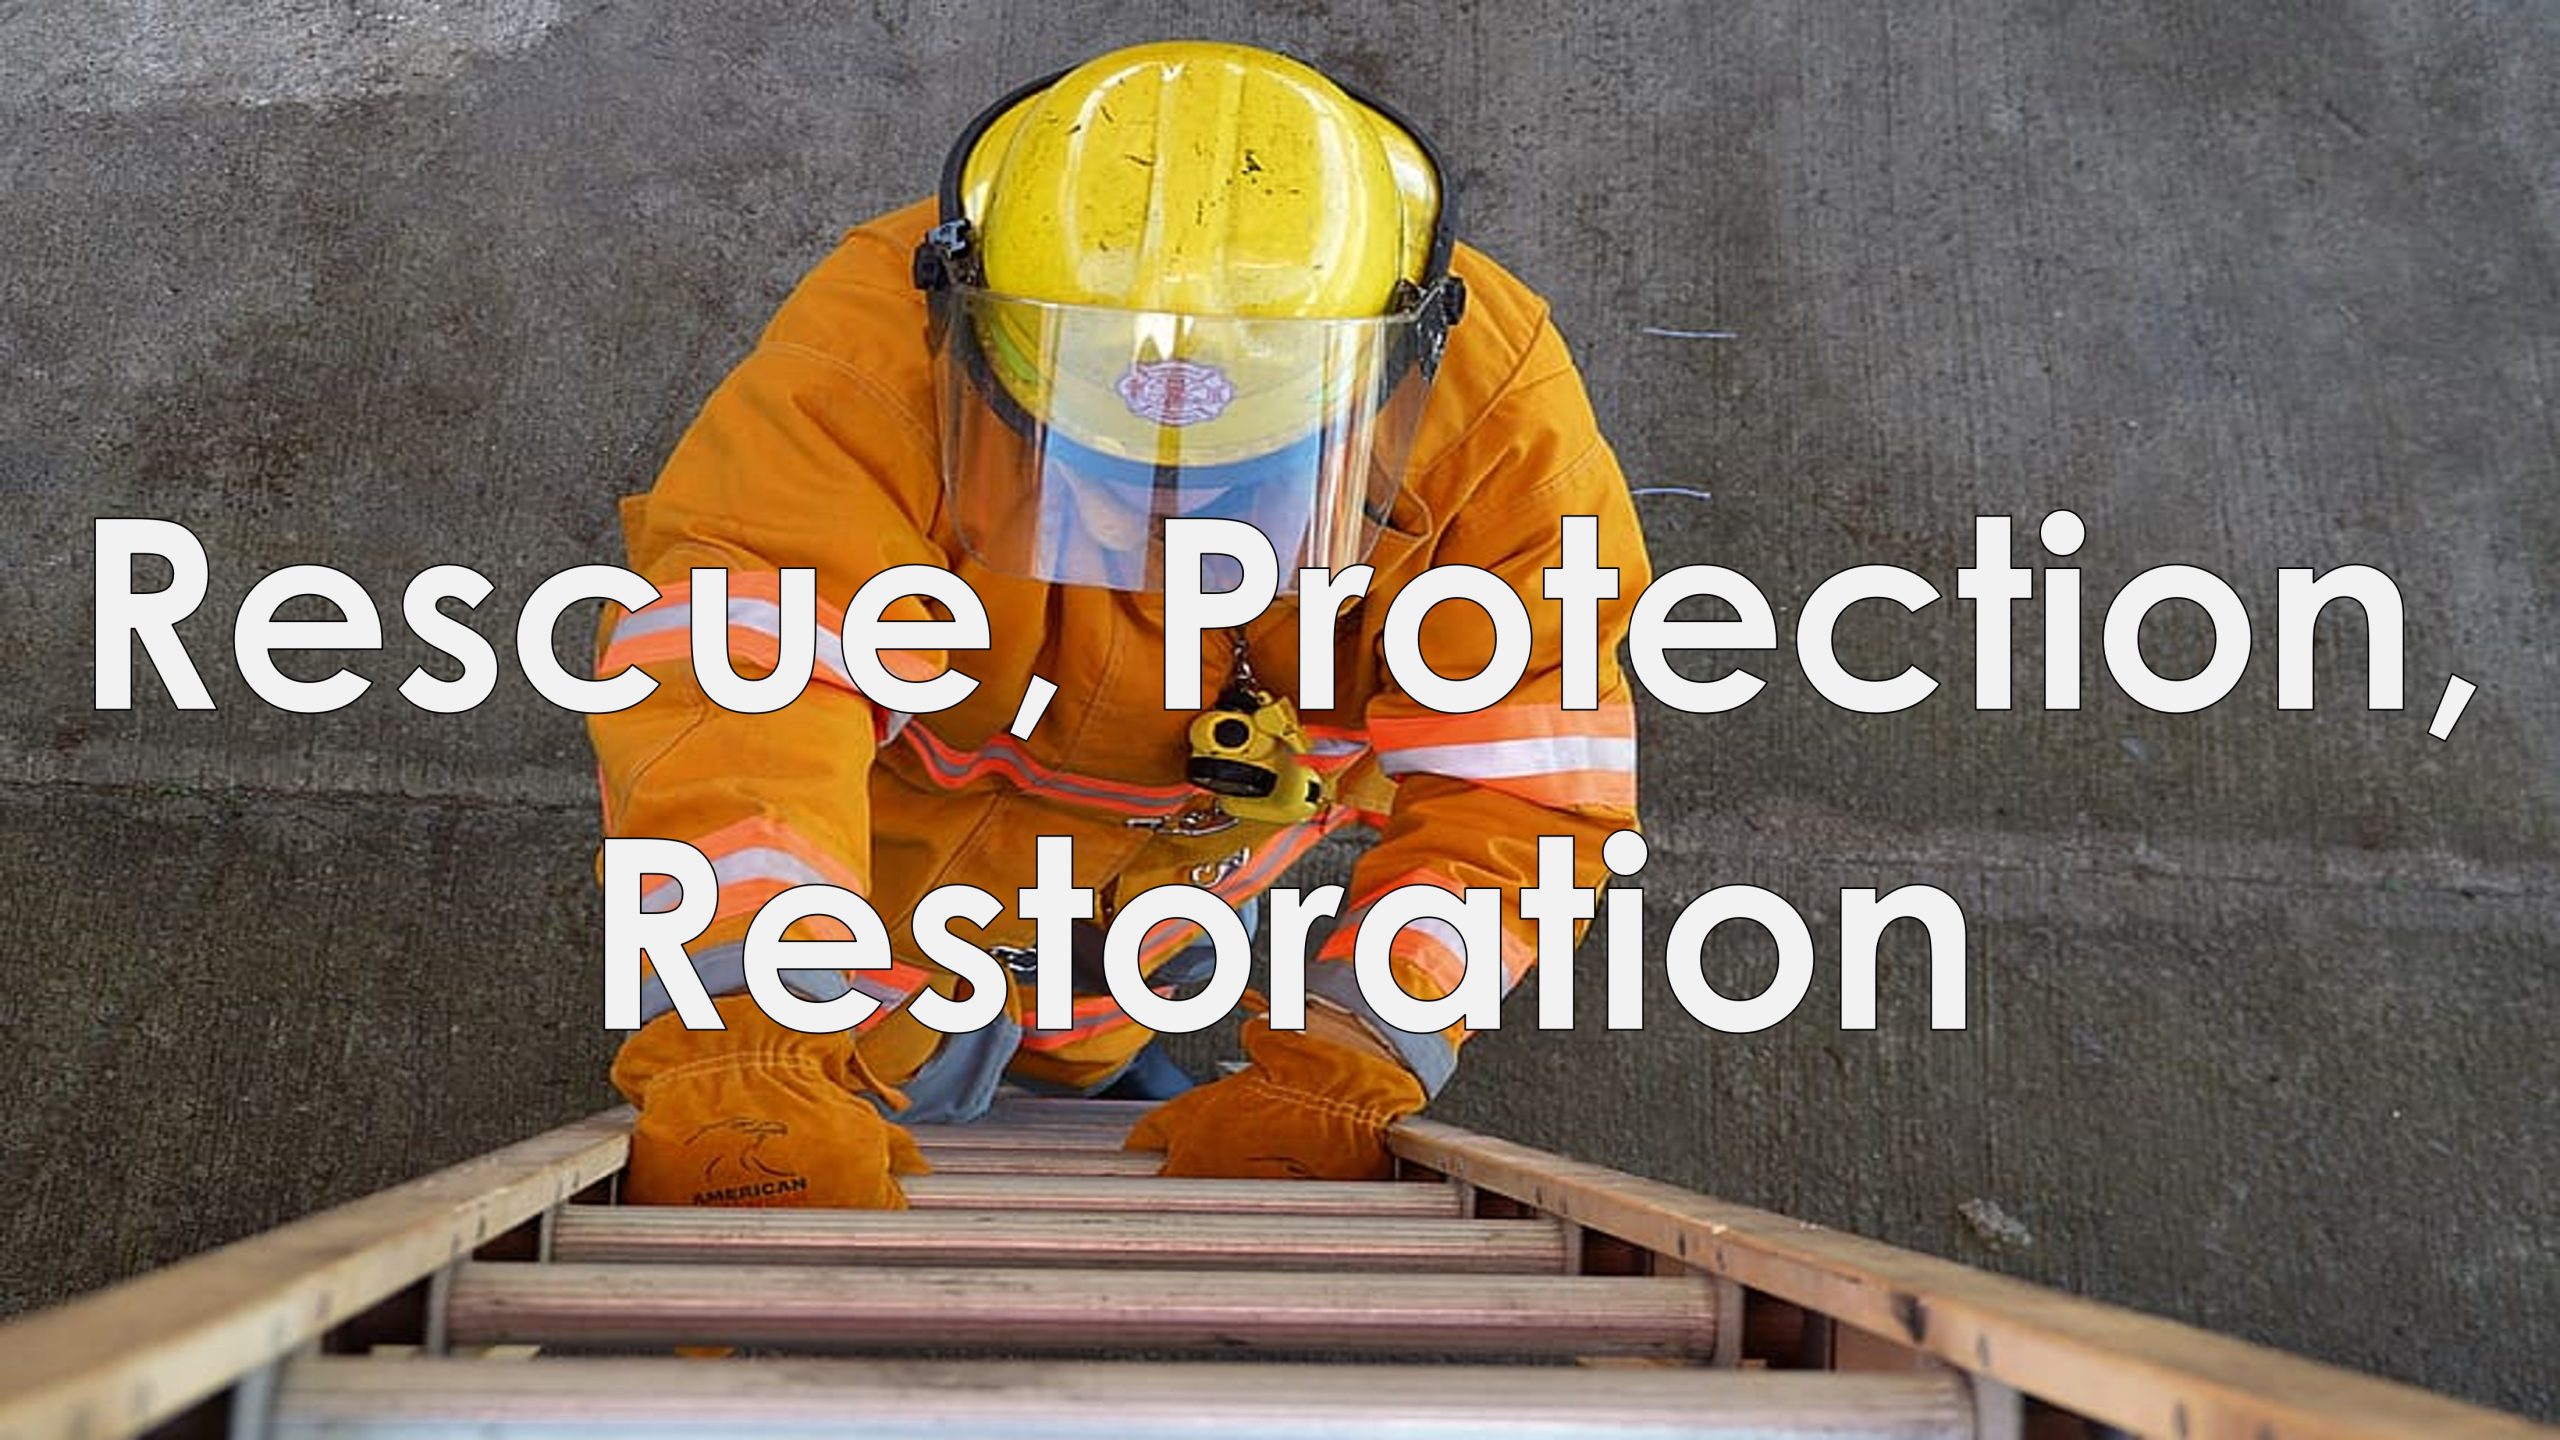 You are currently viewing Rescue, Protection, Restoration – June 2nd